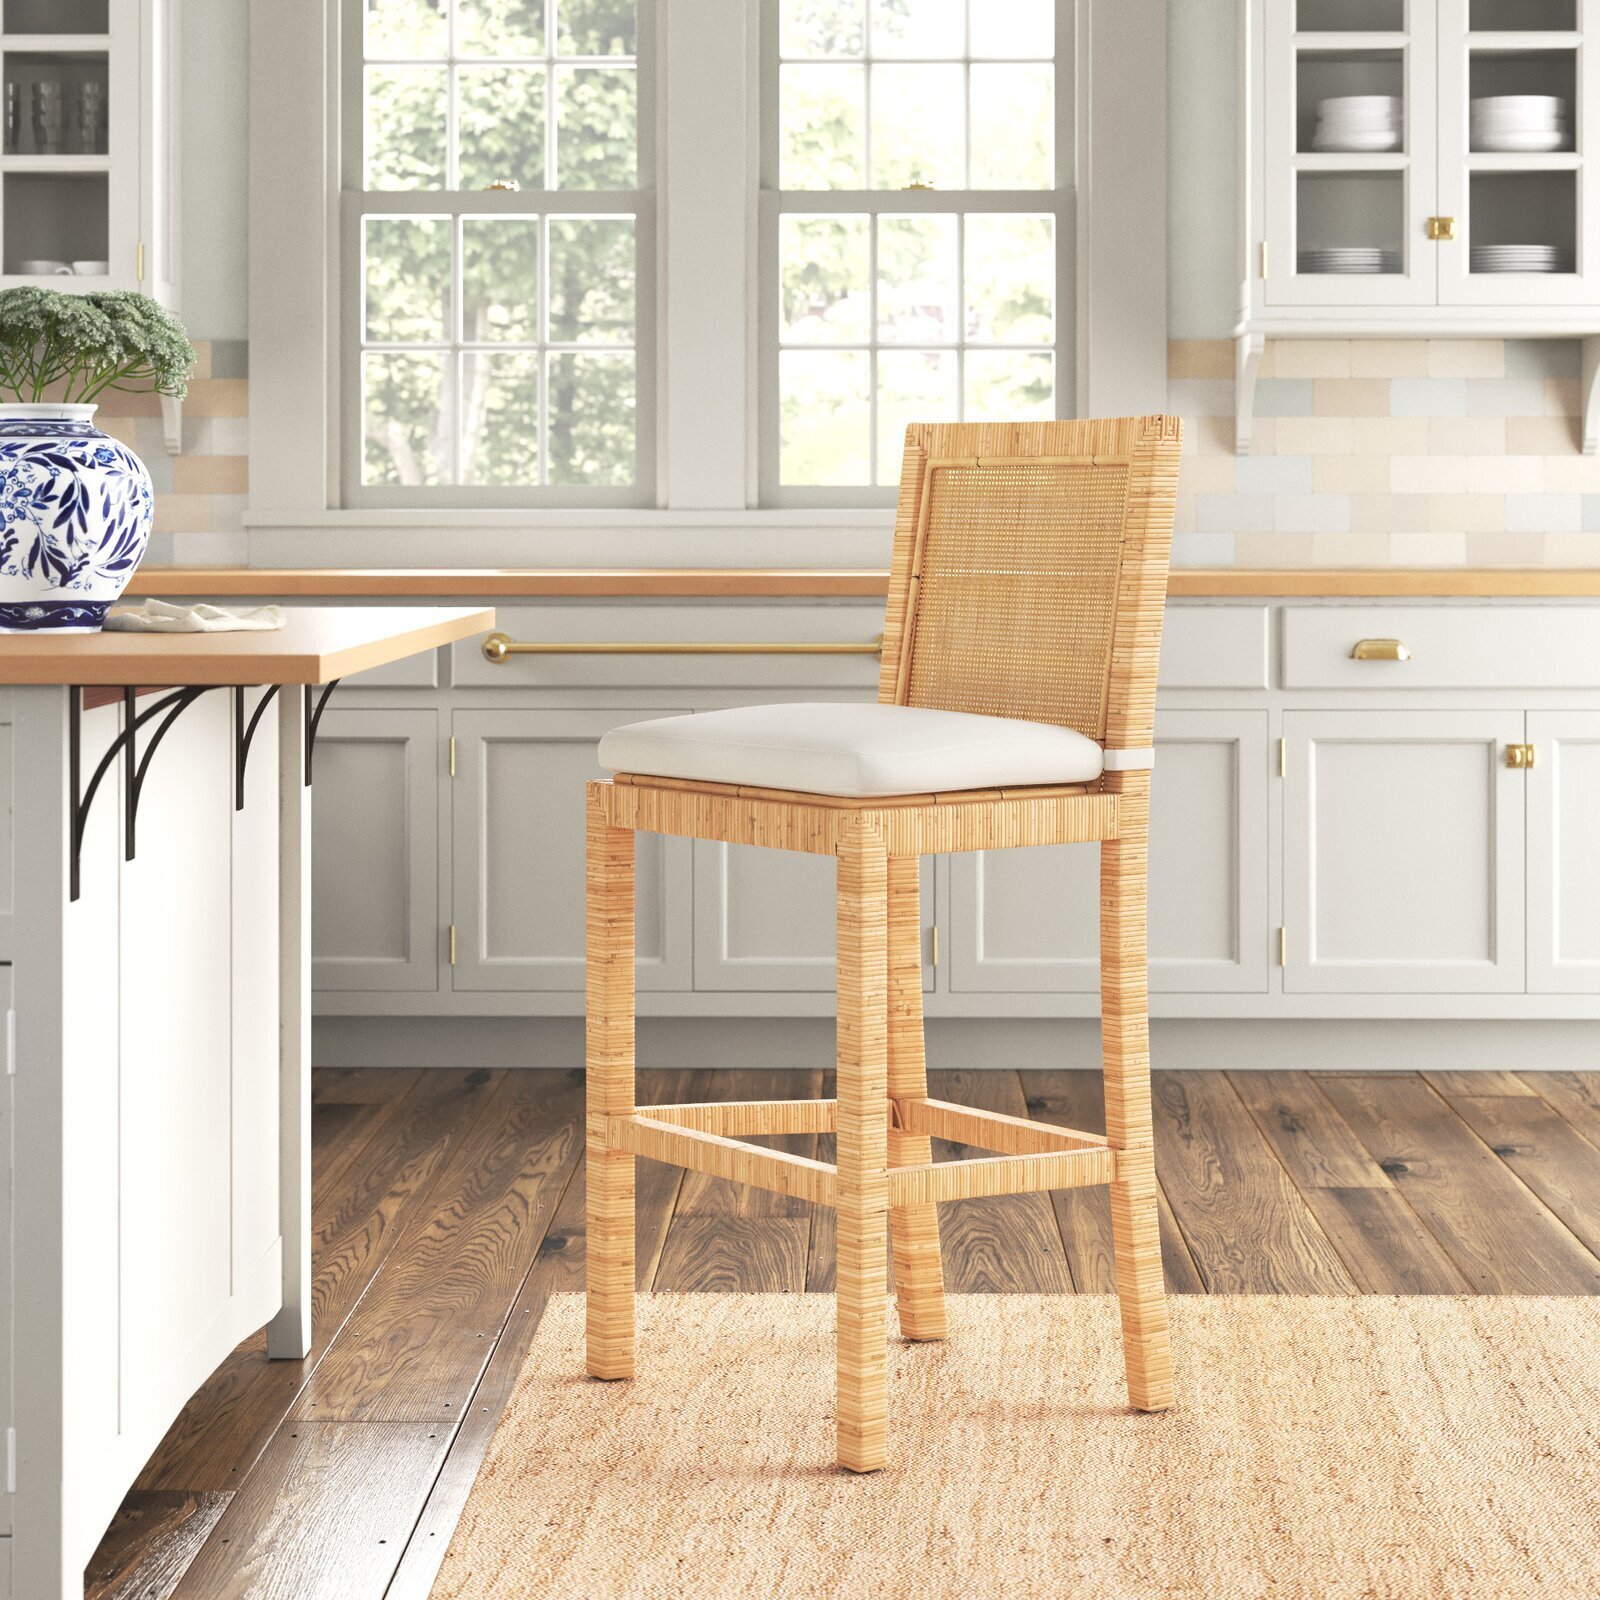 Cane bar stool with accents